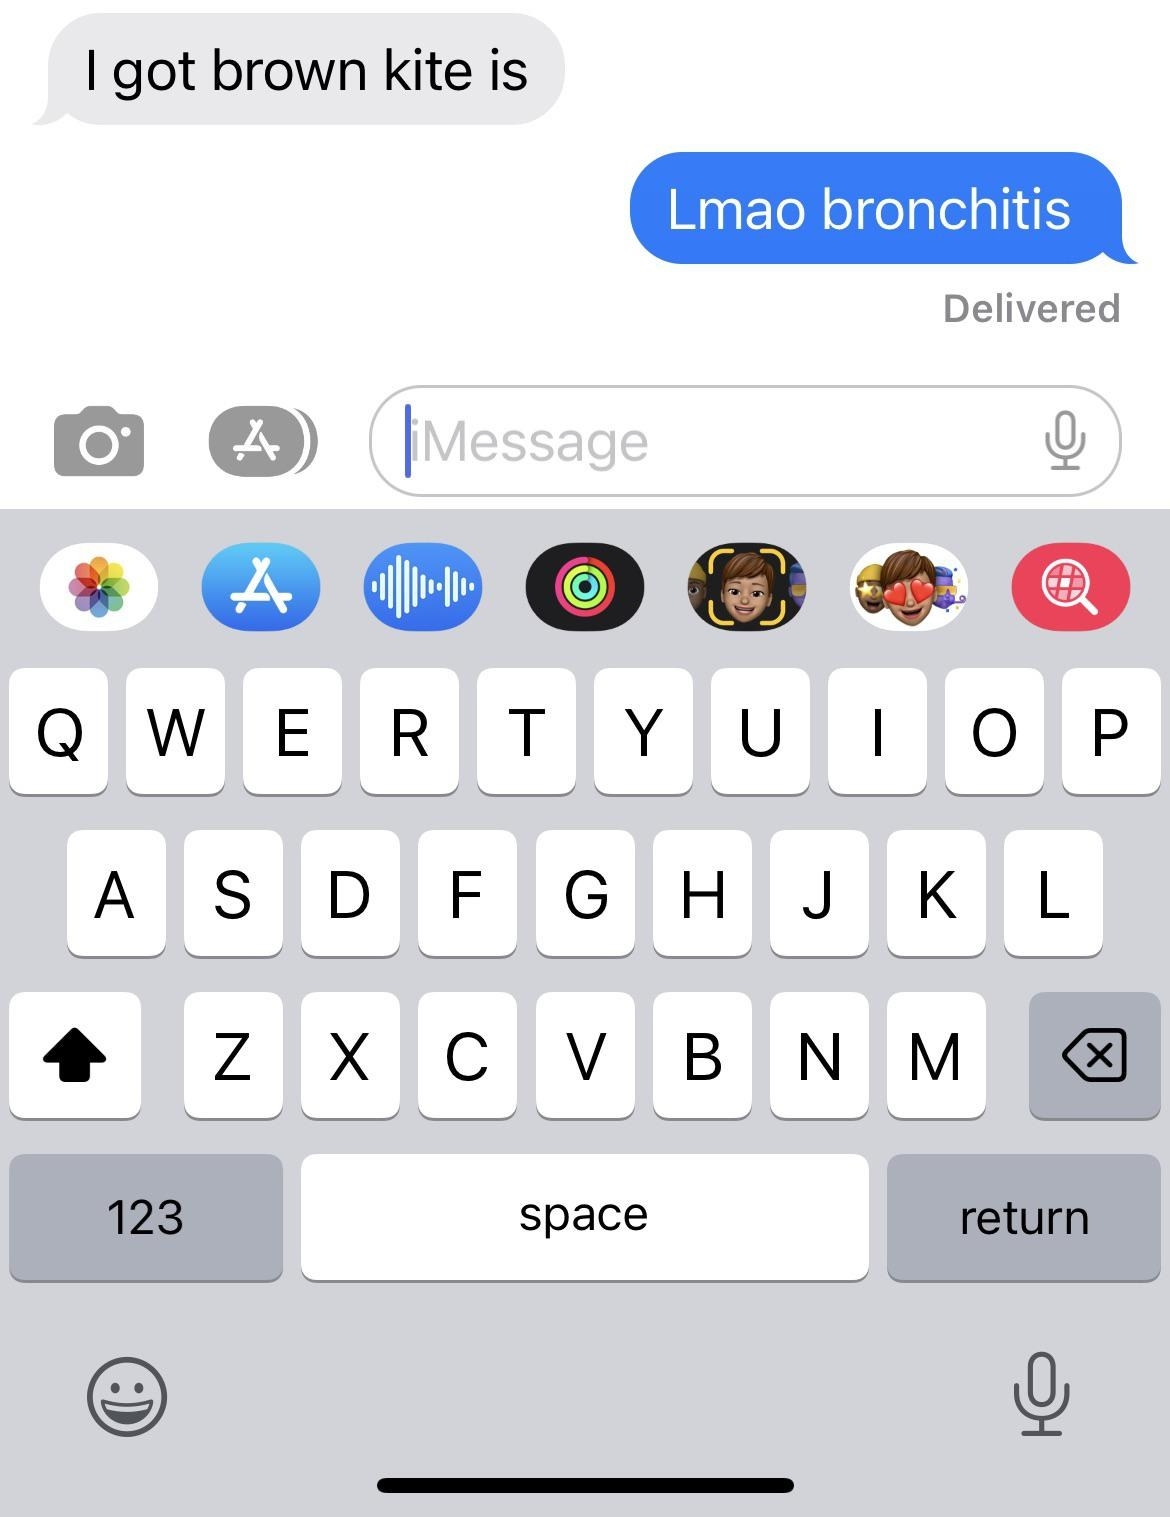 person saying brown kite is instead of bronchitis